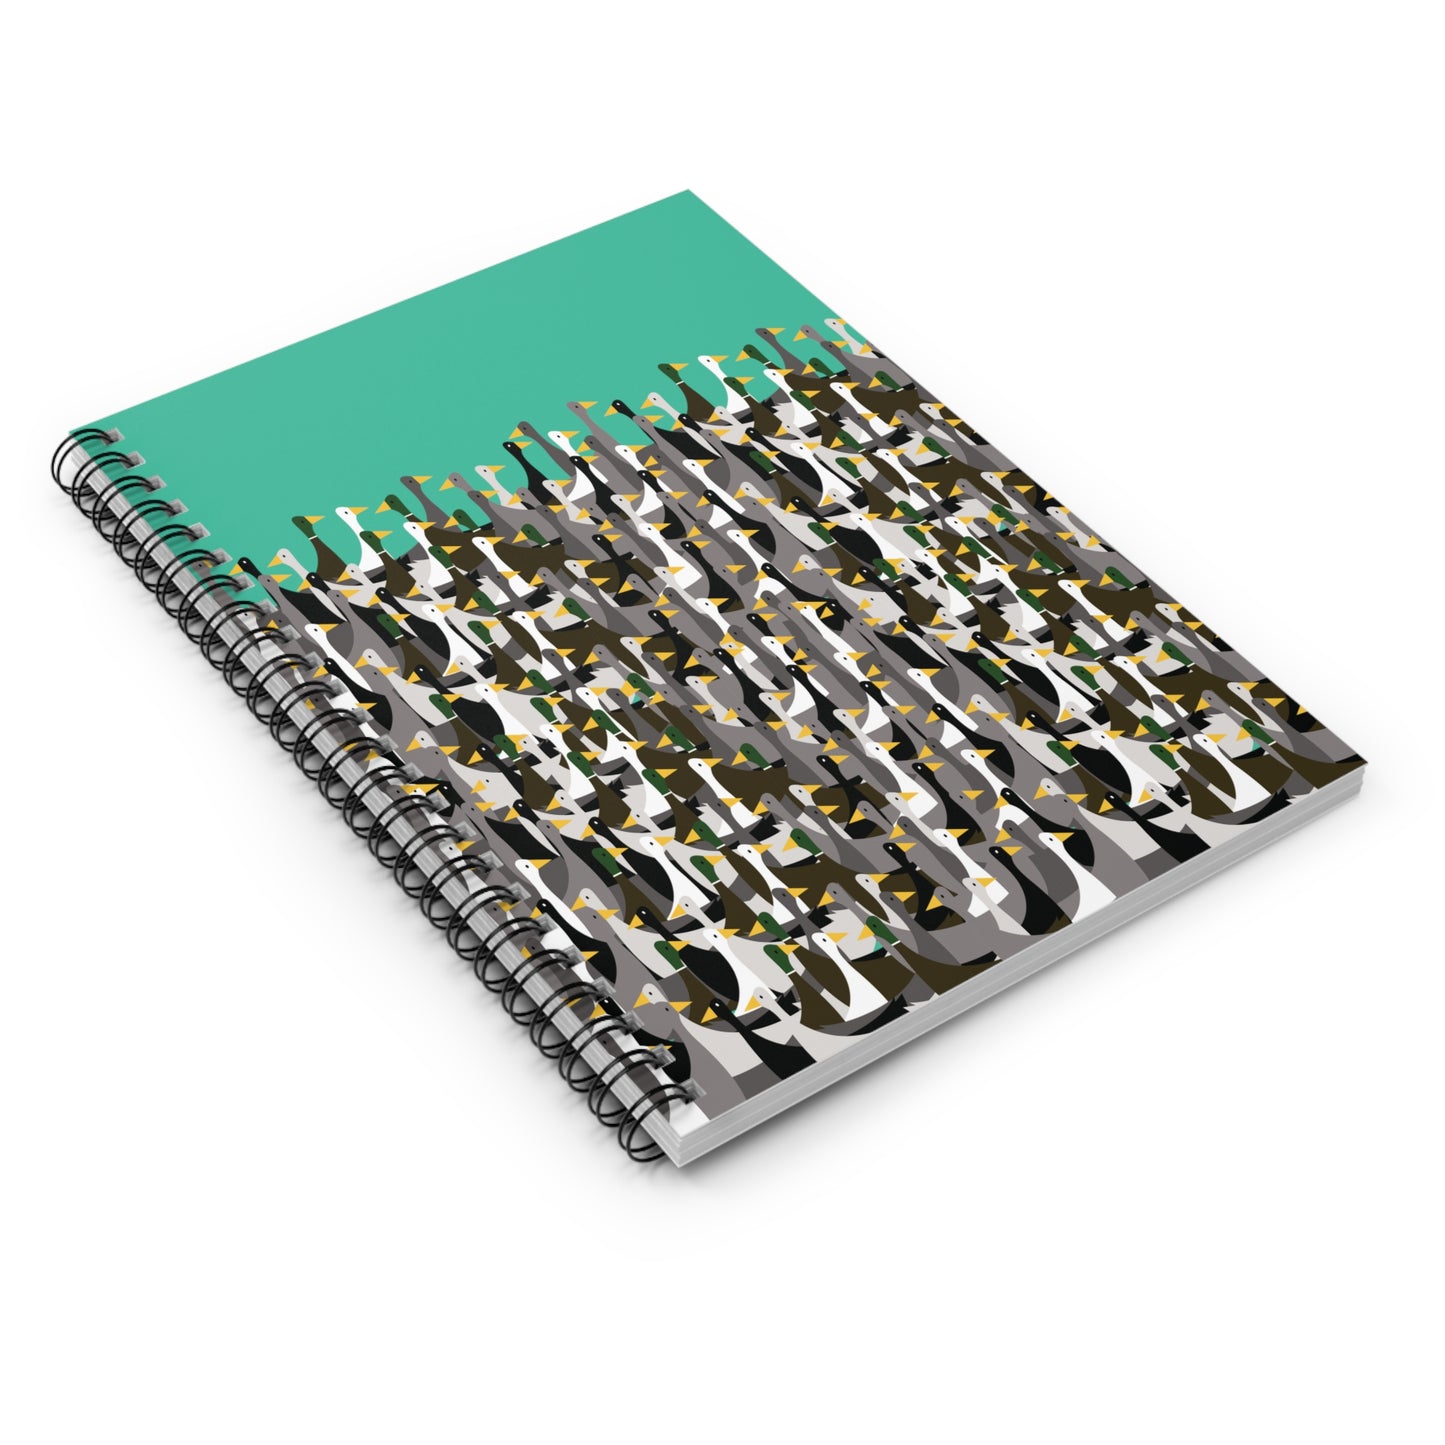 That is a LOT of ducks - Turquoise 12d3ad - Spiral Notebook - Ruled Line